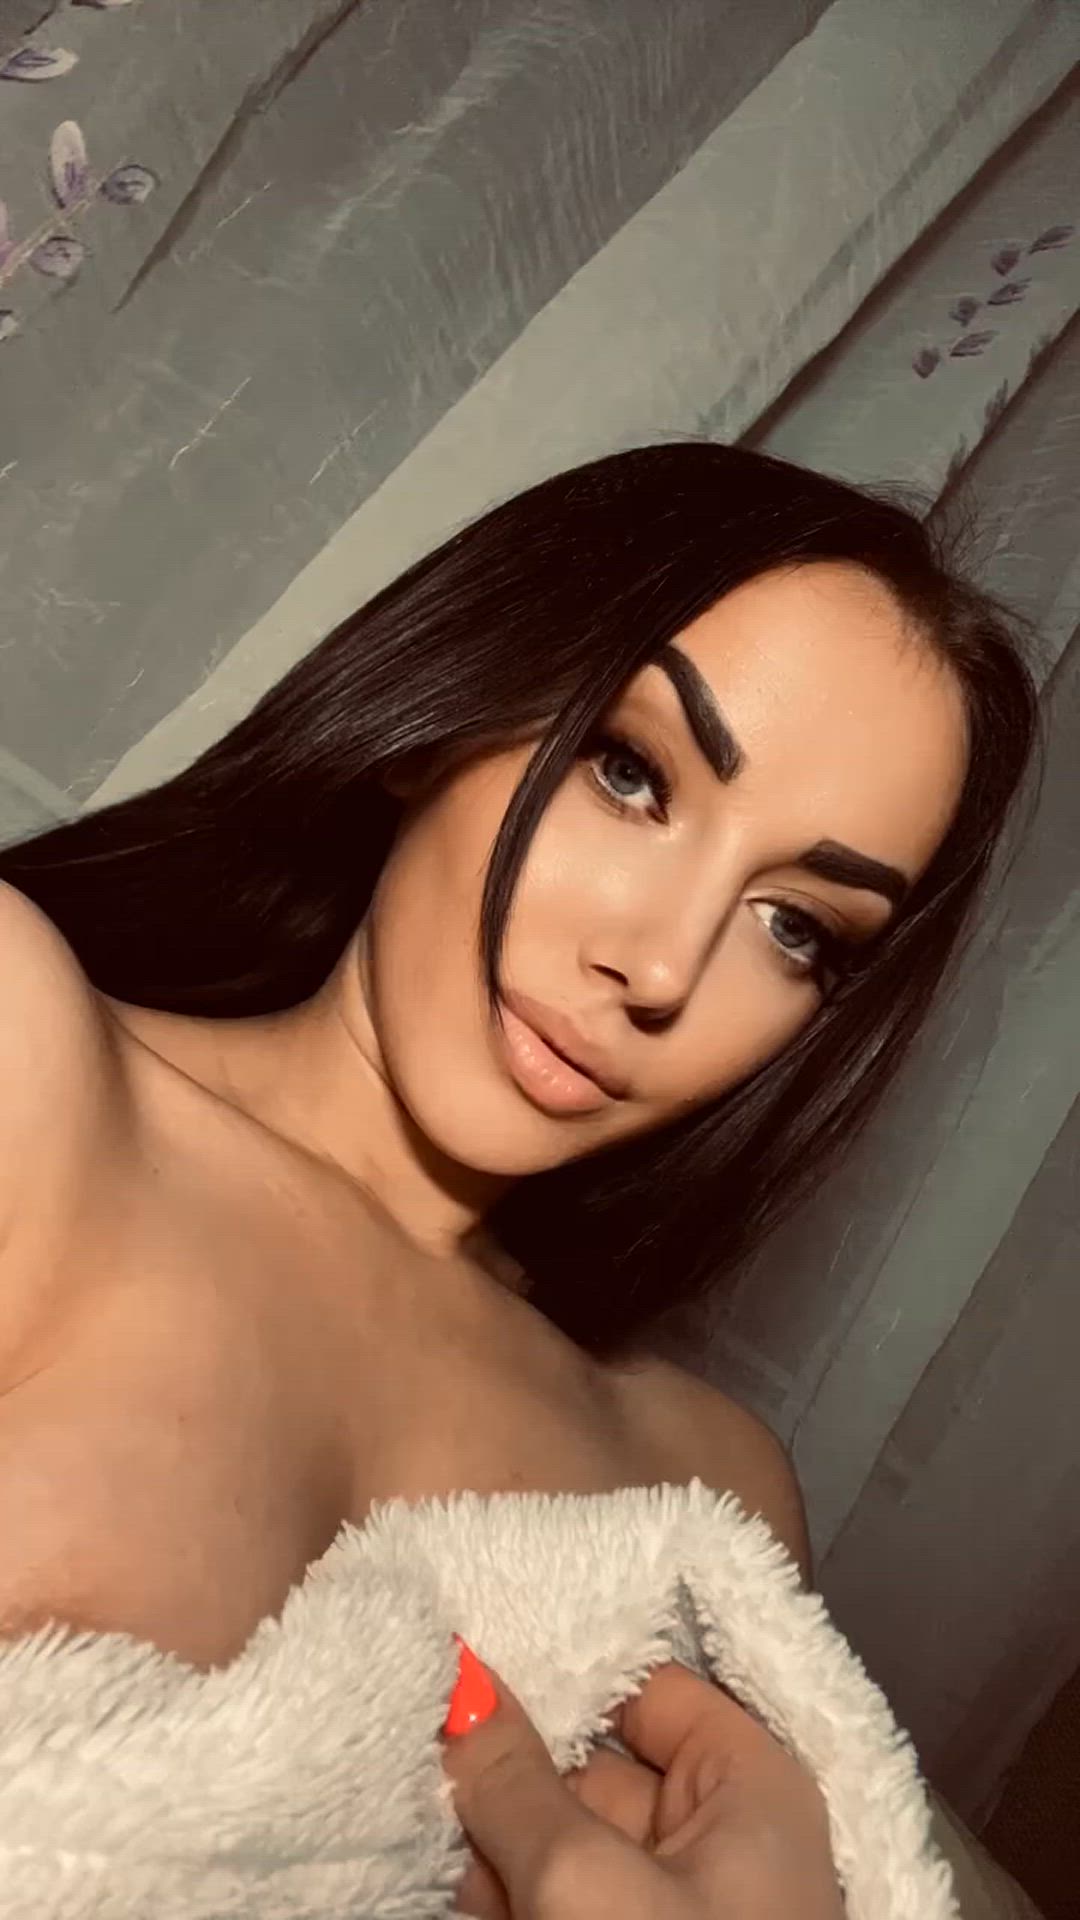 Amateur porn video with onlyfans model laurenro7 <strong>@laurenro7</strong>